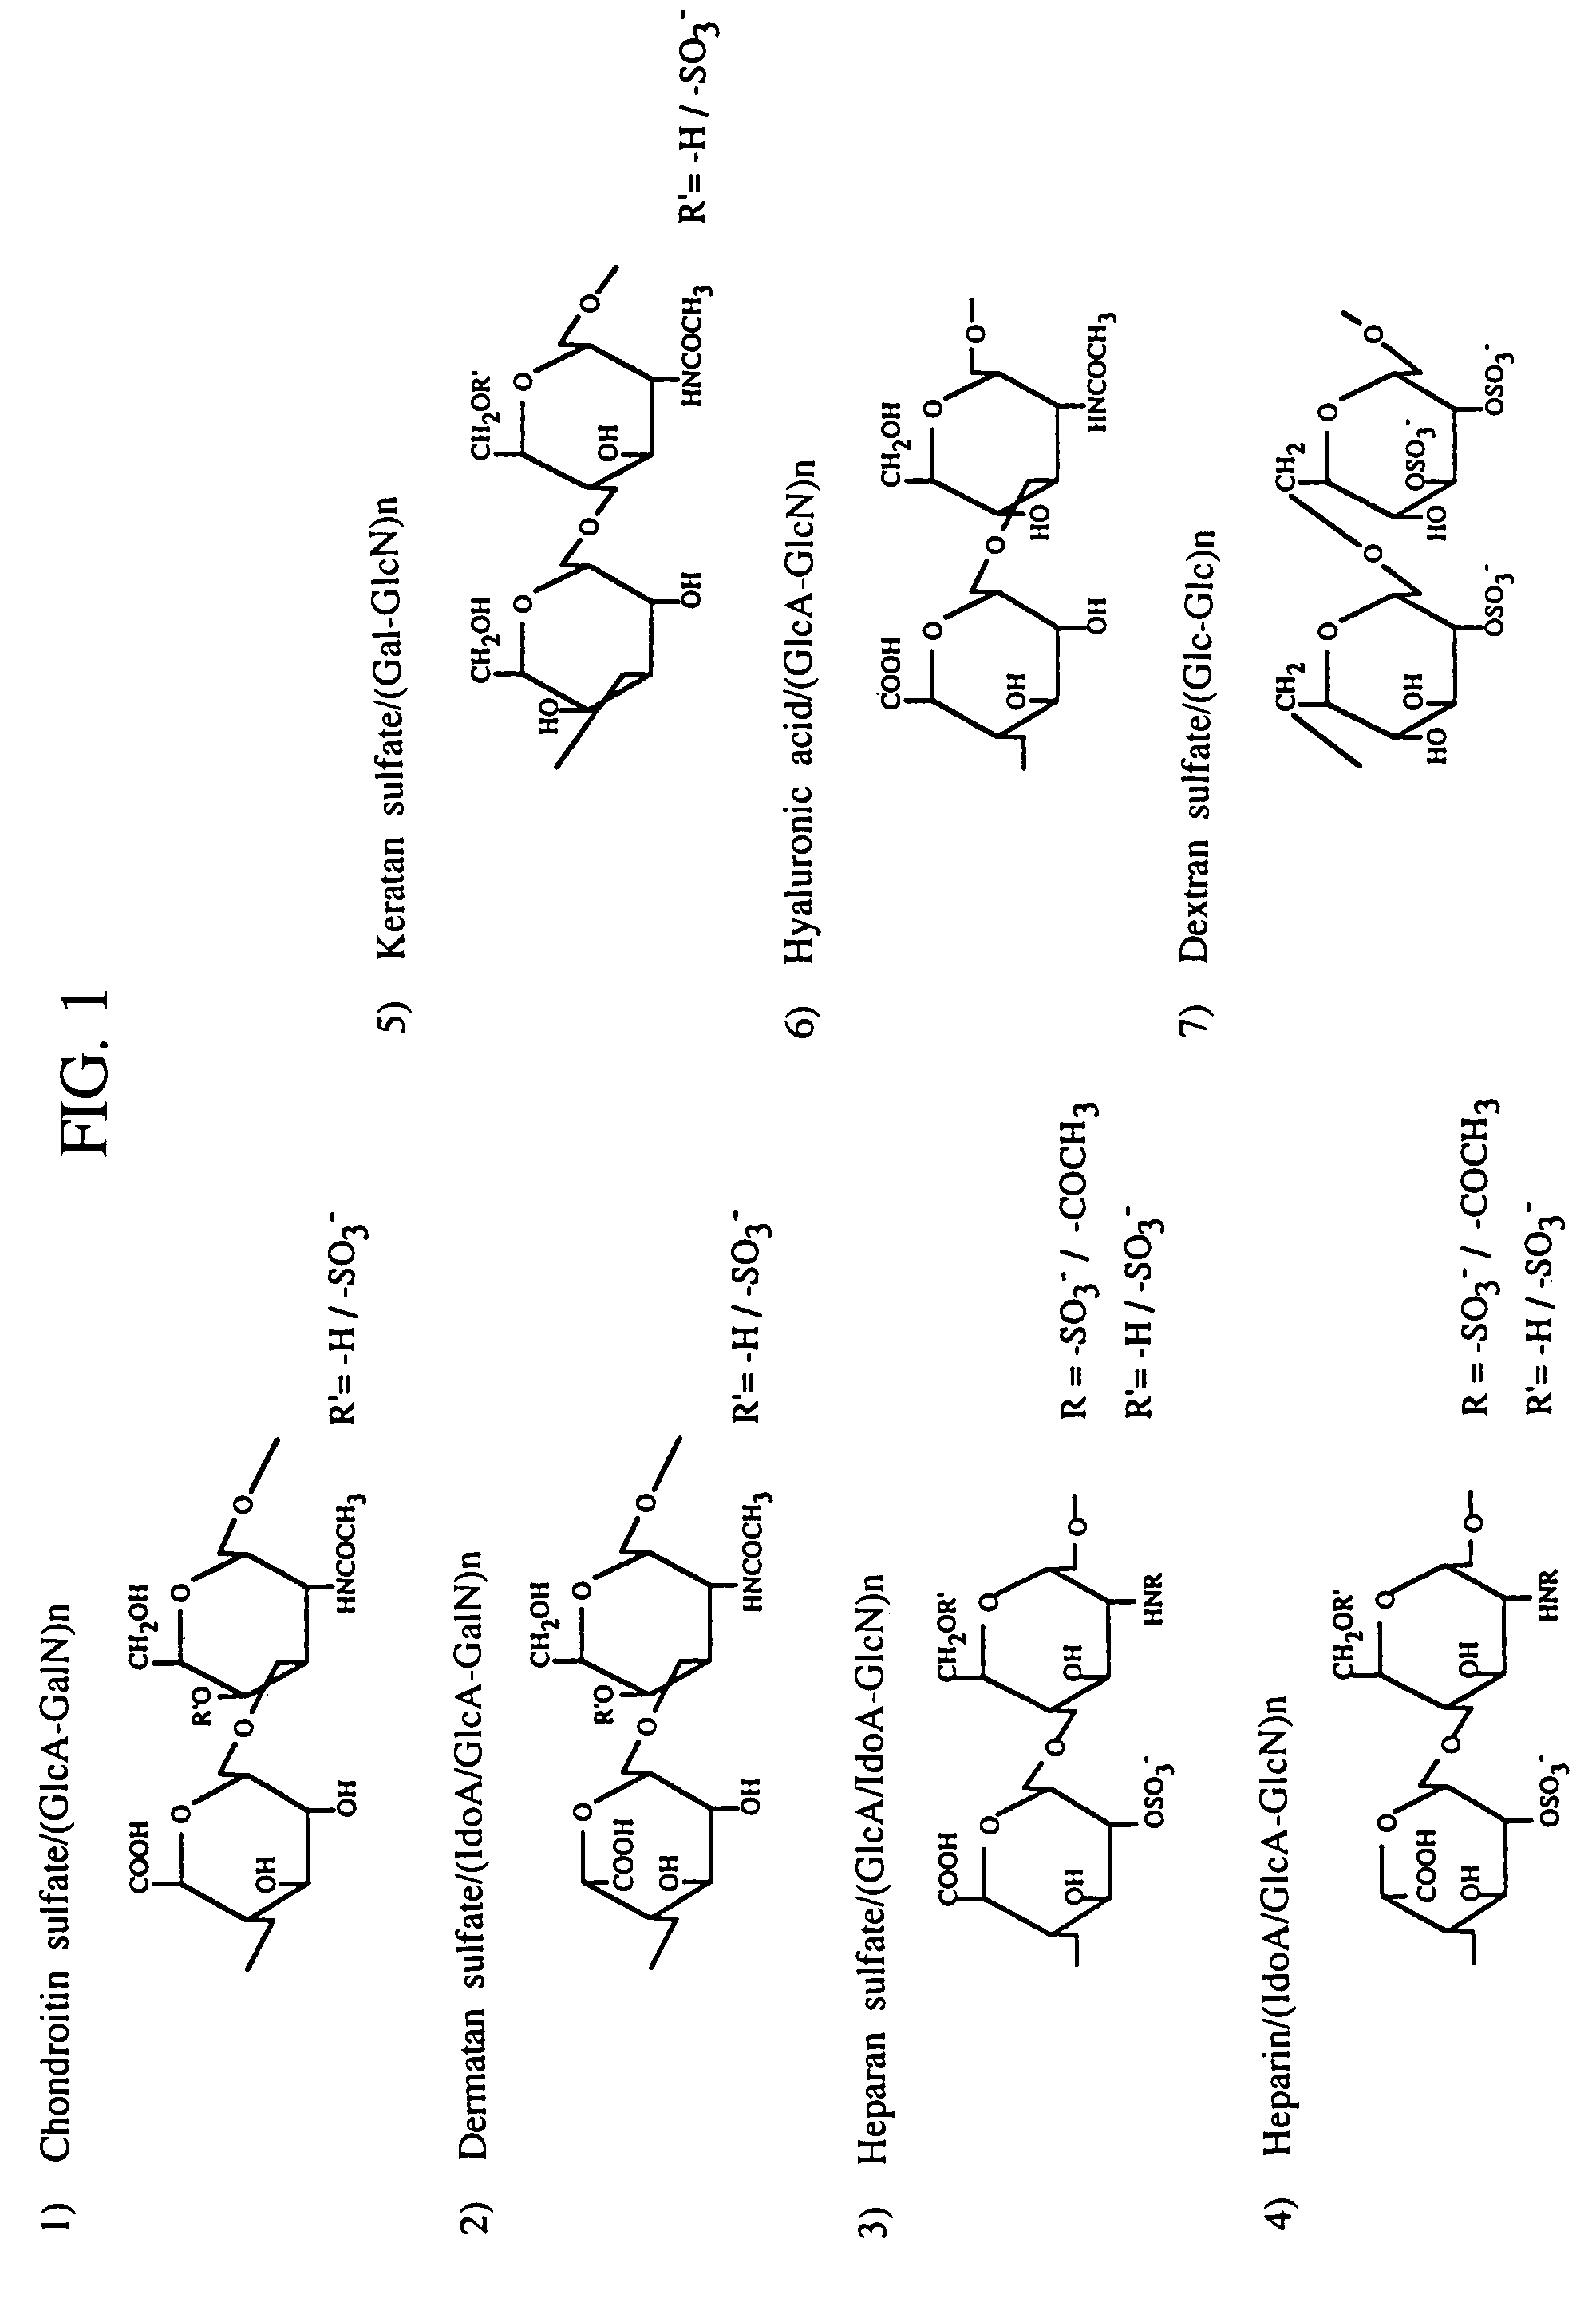 Heparin-binding proteins modified with sugar chains, method of producing the same and pharmaceutical compositions containing the same